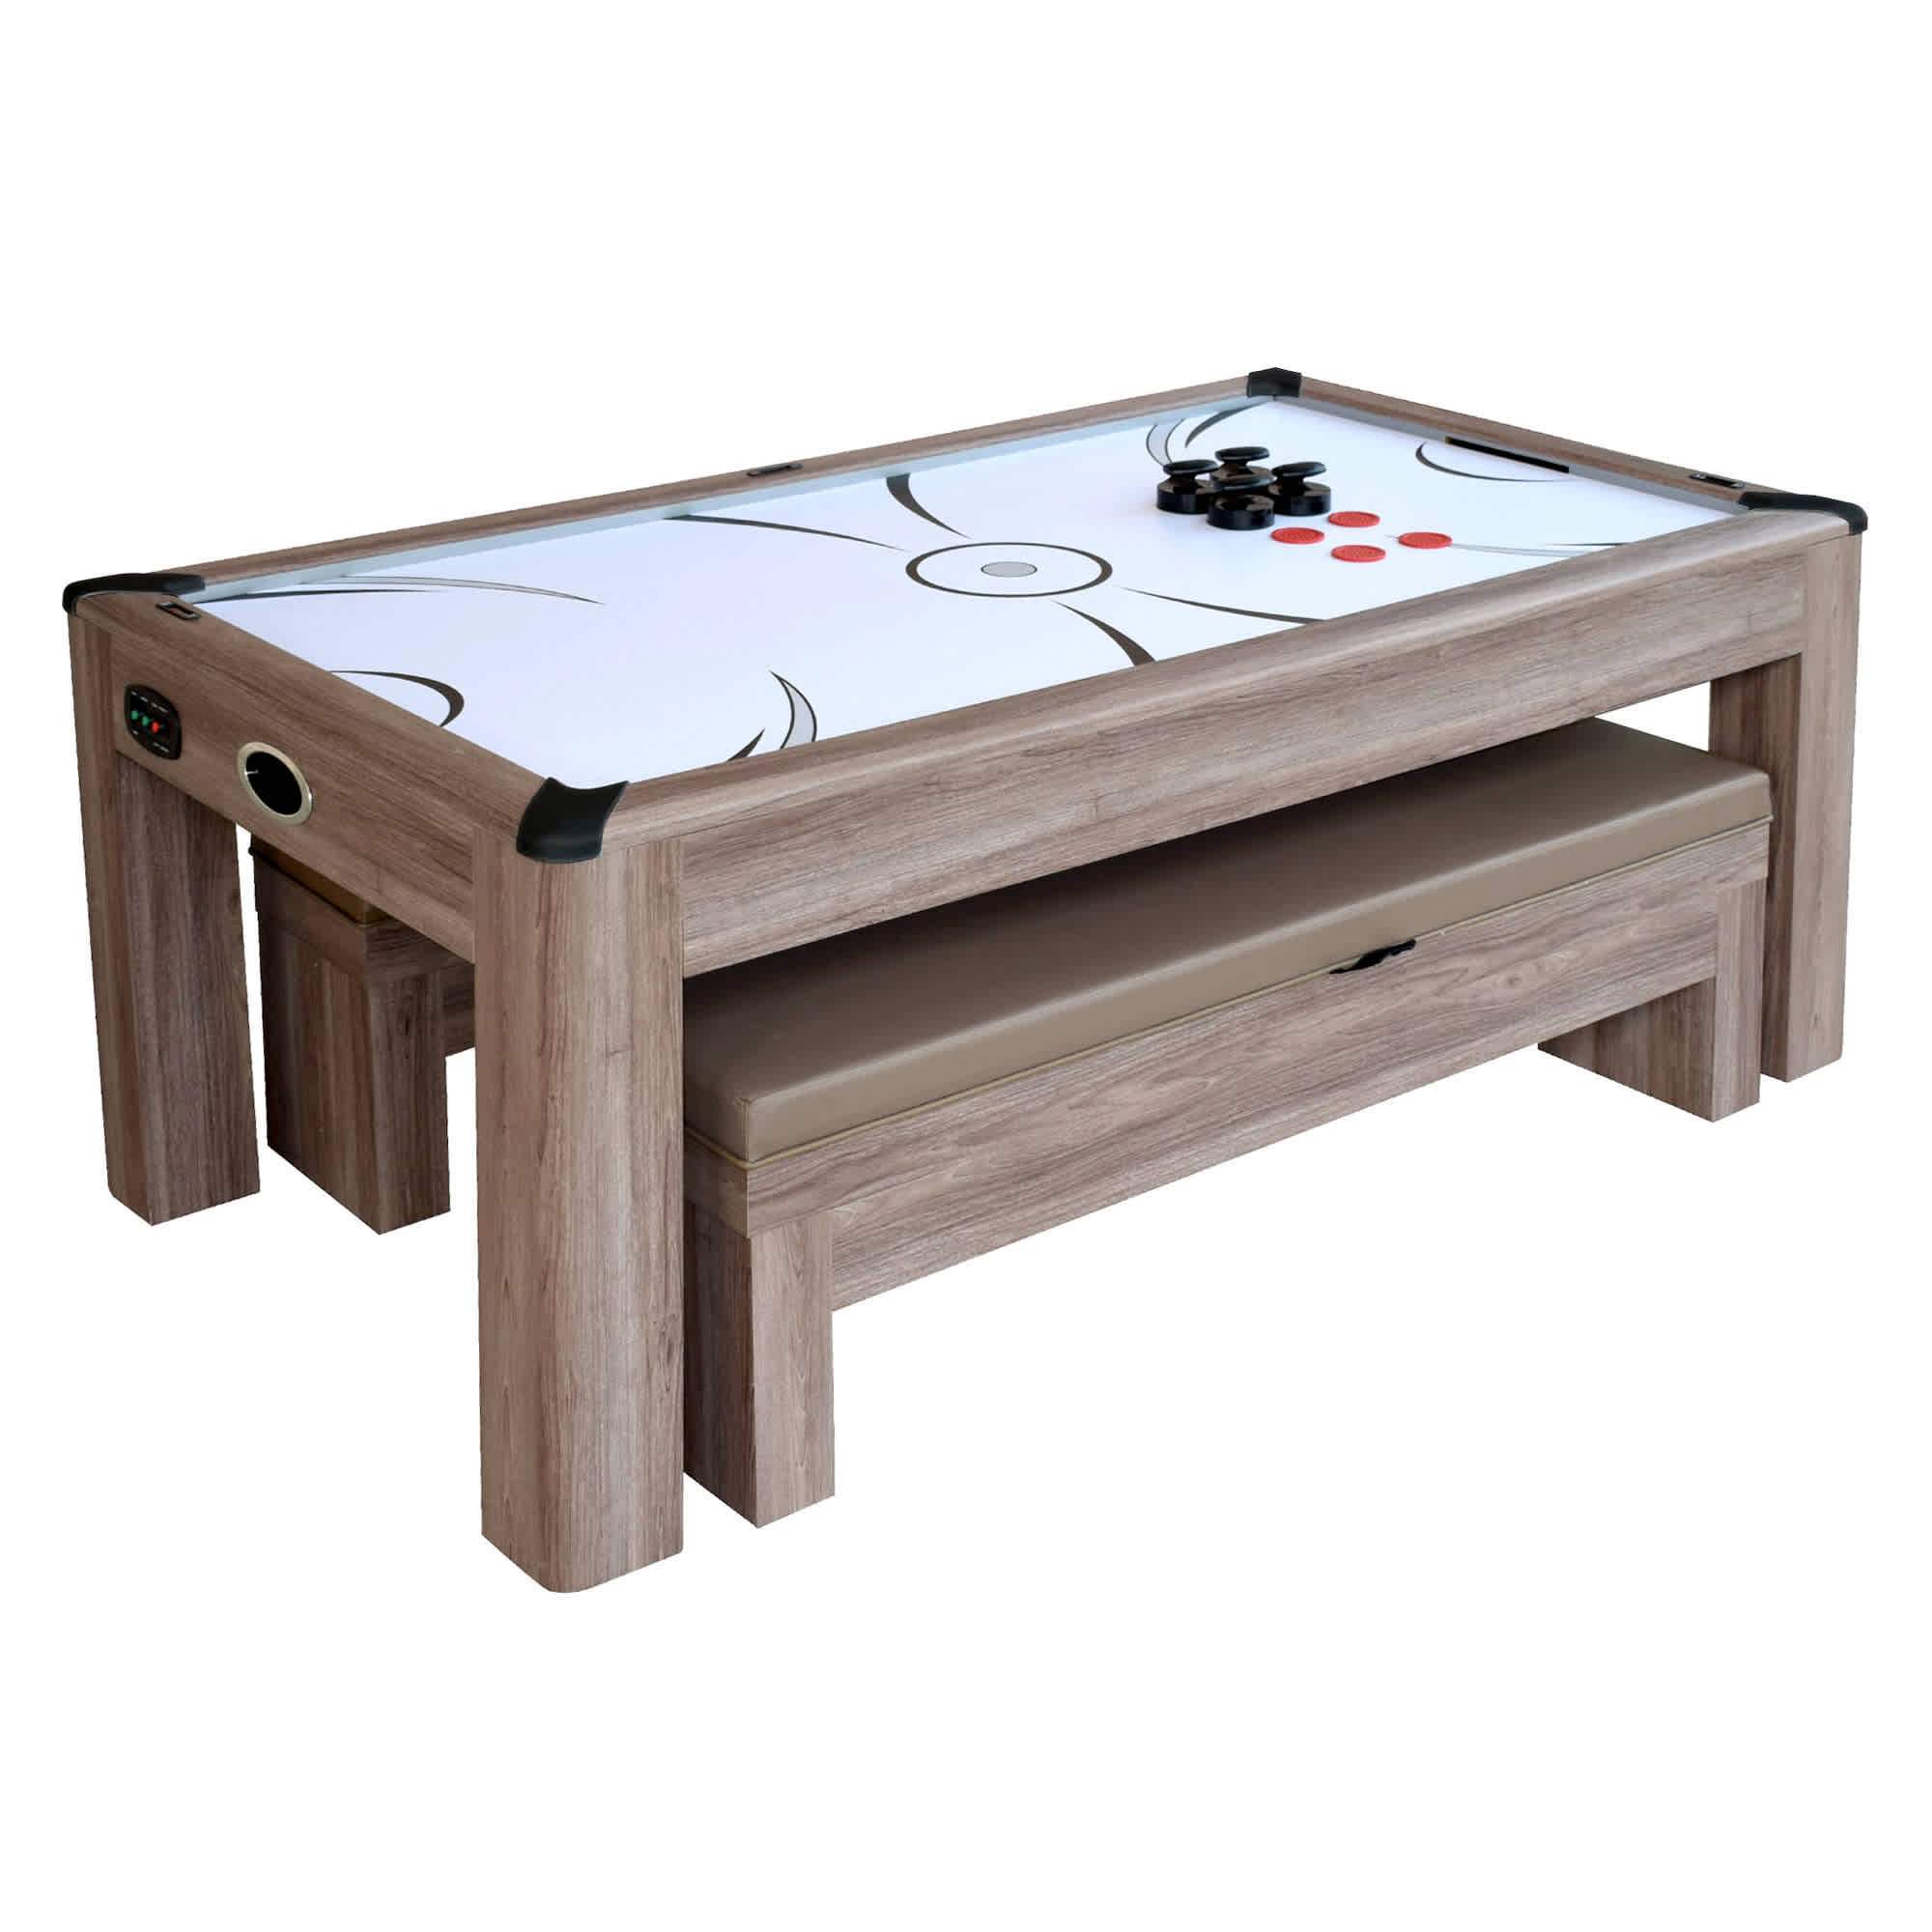 Hathaway Driftwood 7' Air Hockey Table Tennis Combo Set w/Benches